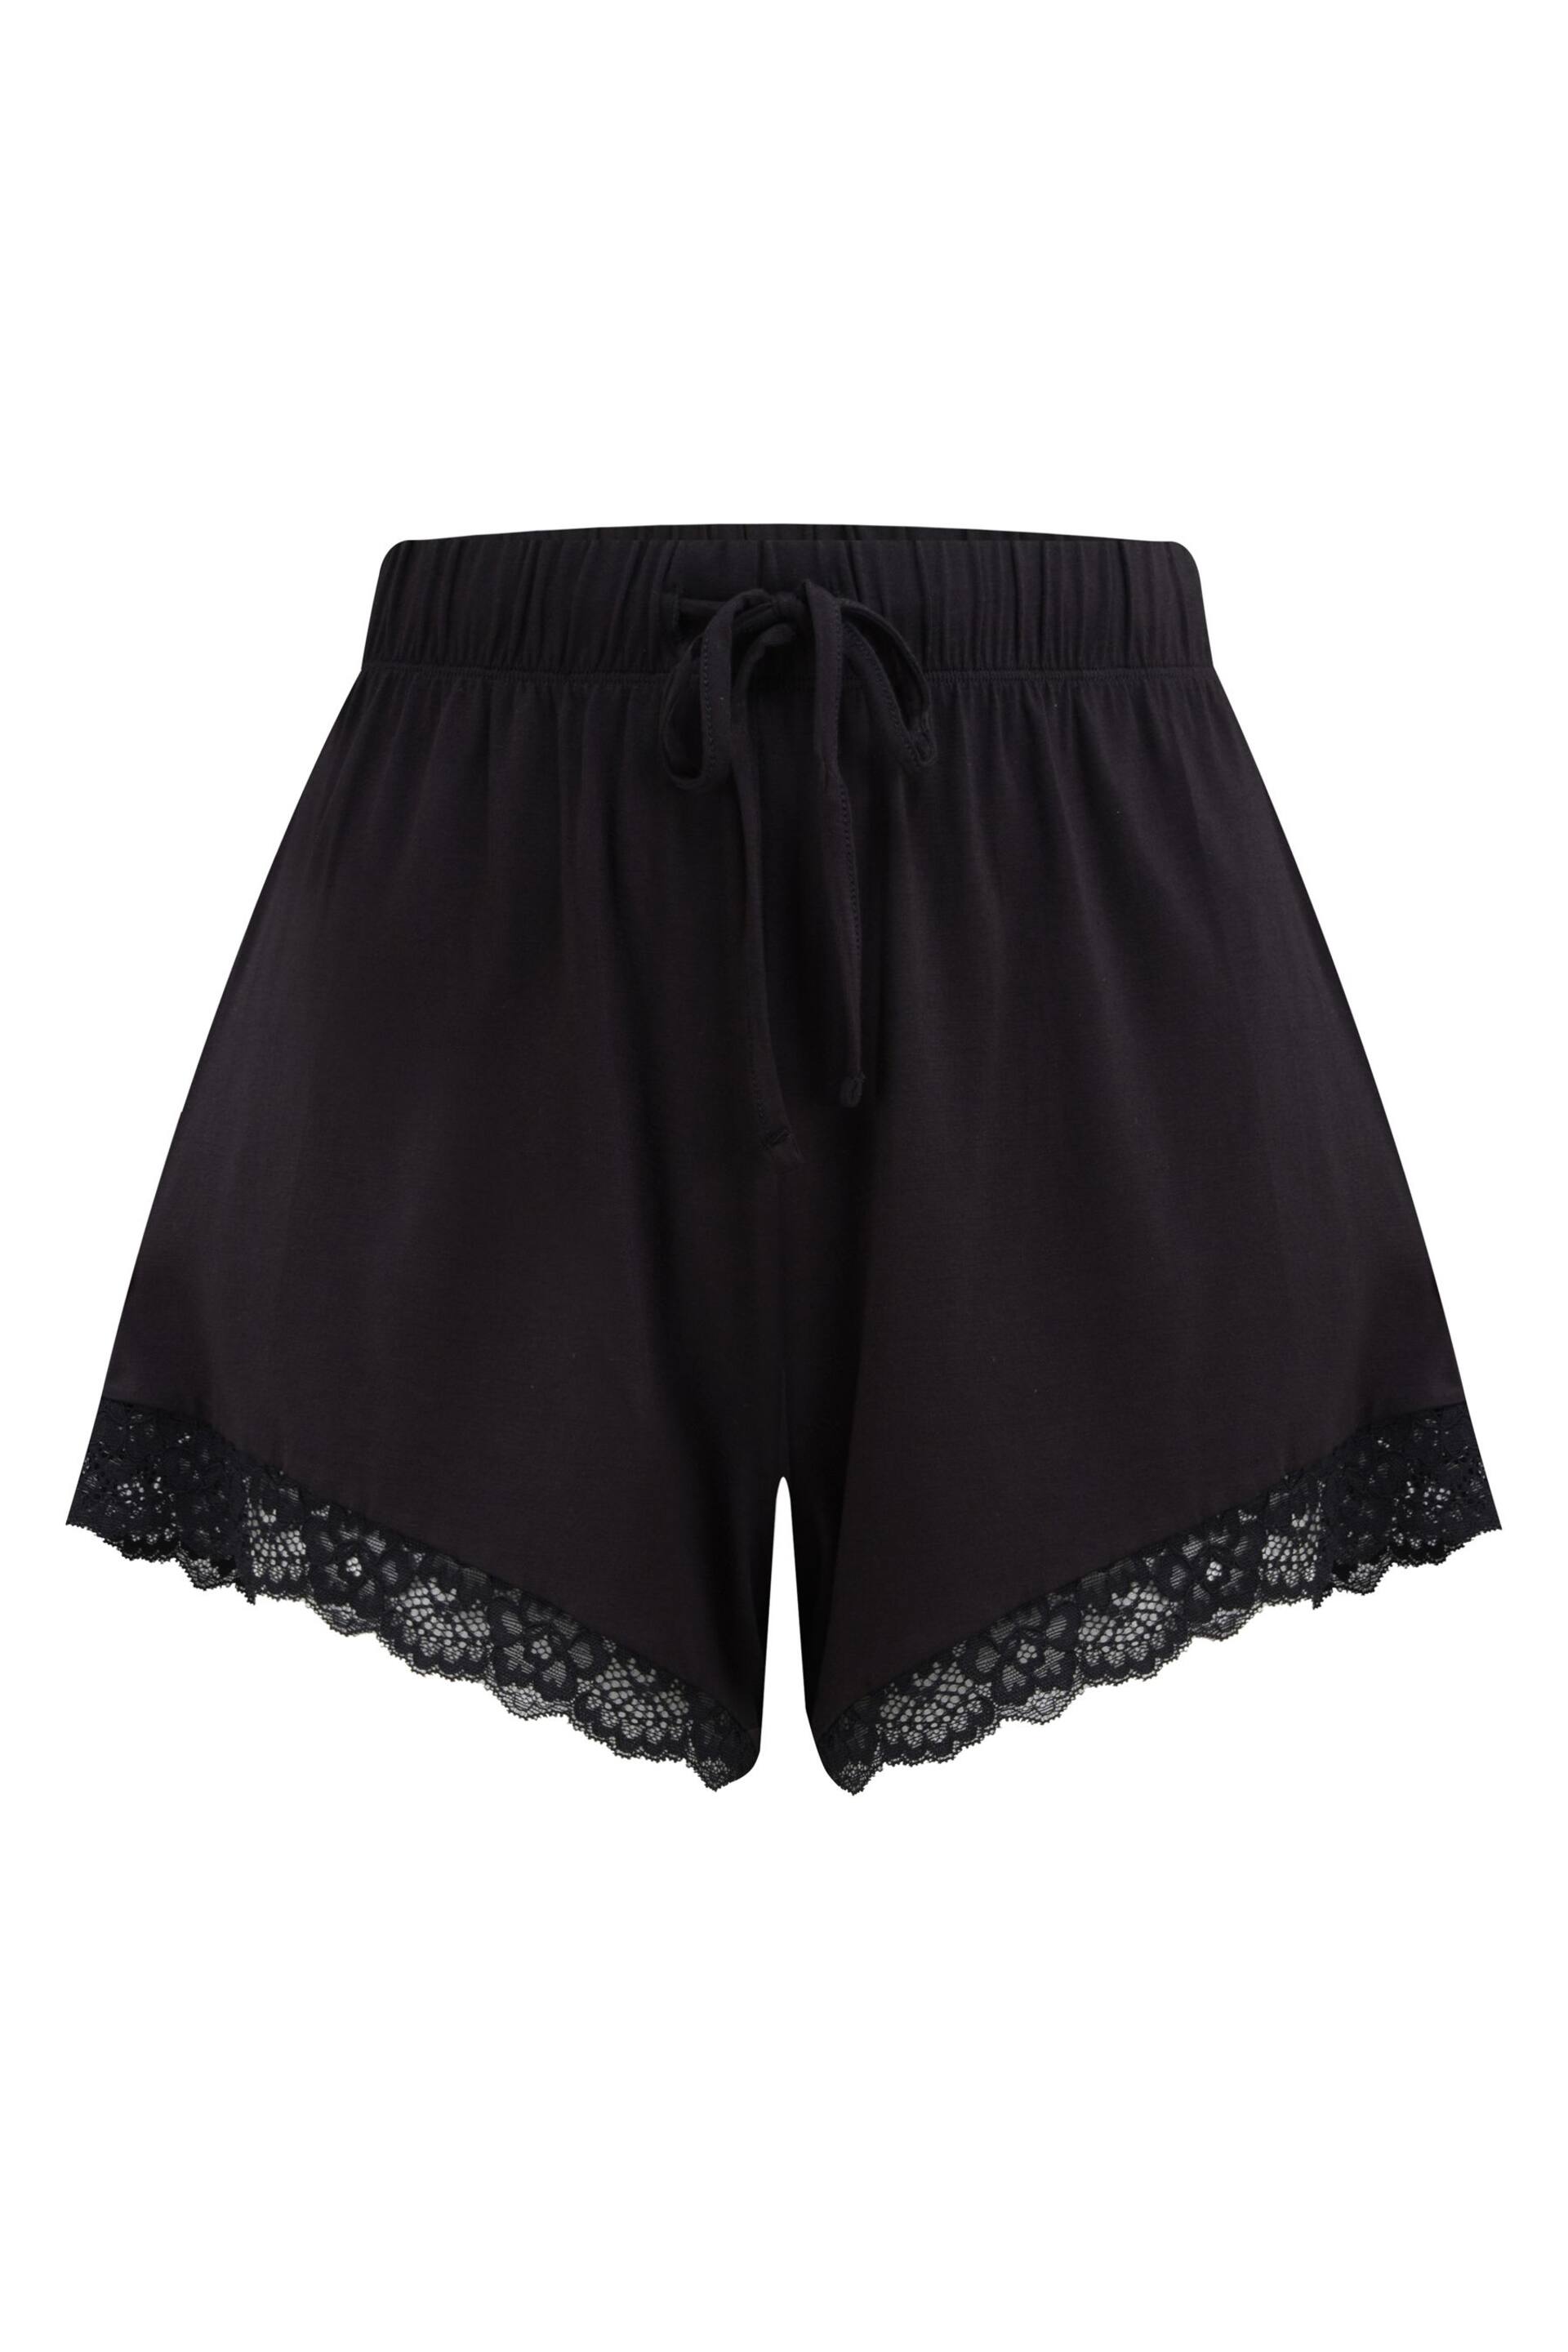 Pour Moi Black Sofa Loves Lace Soft Jersey Shorts - Image 9 of 9